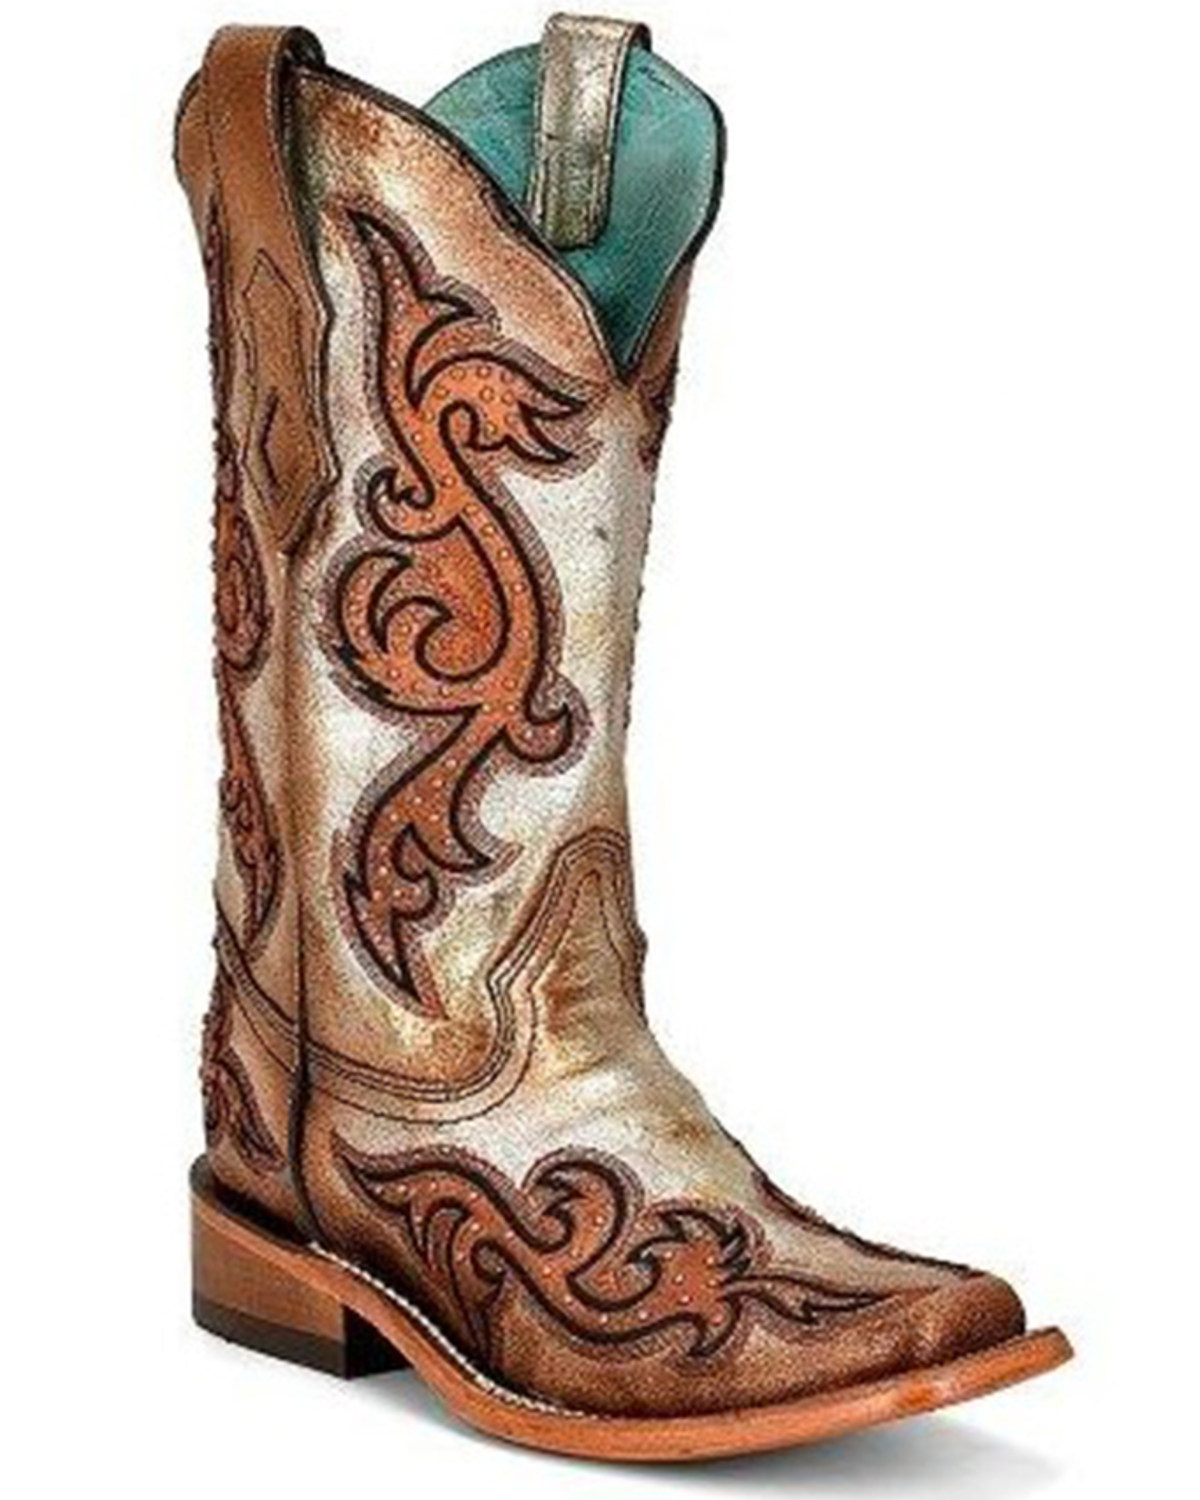 Corral Women's Studded Western Boots - Square Toe